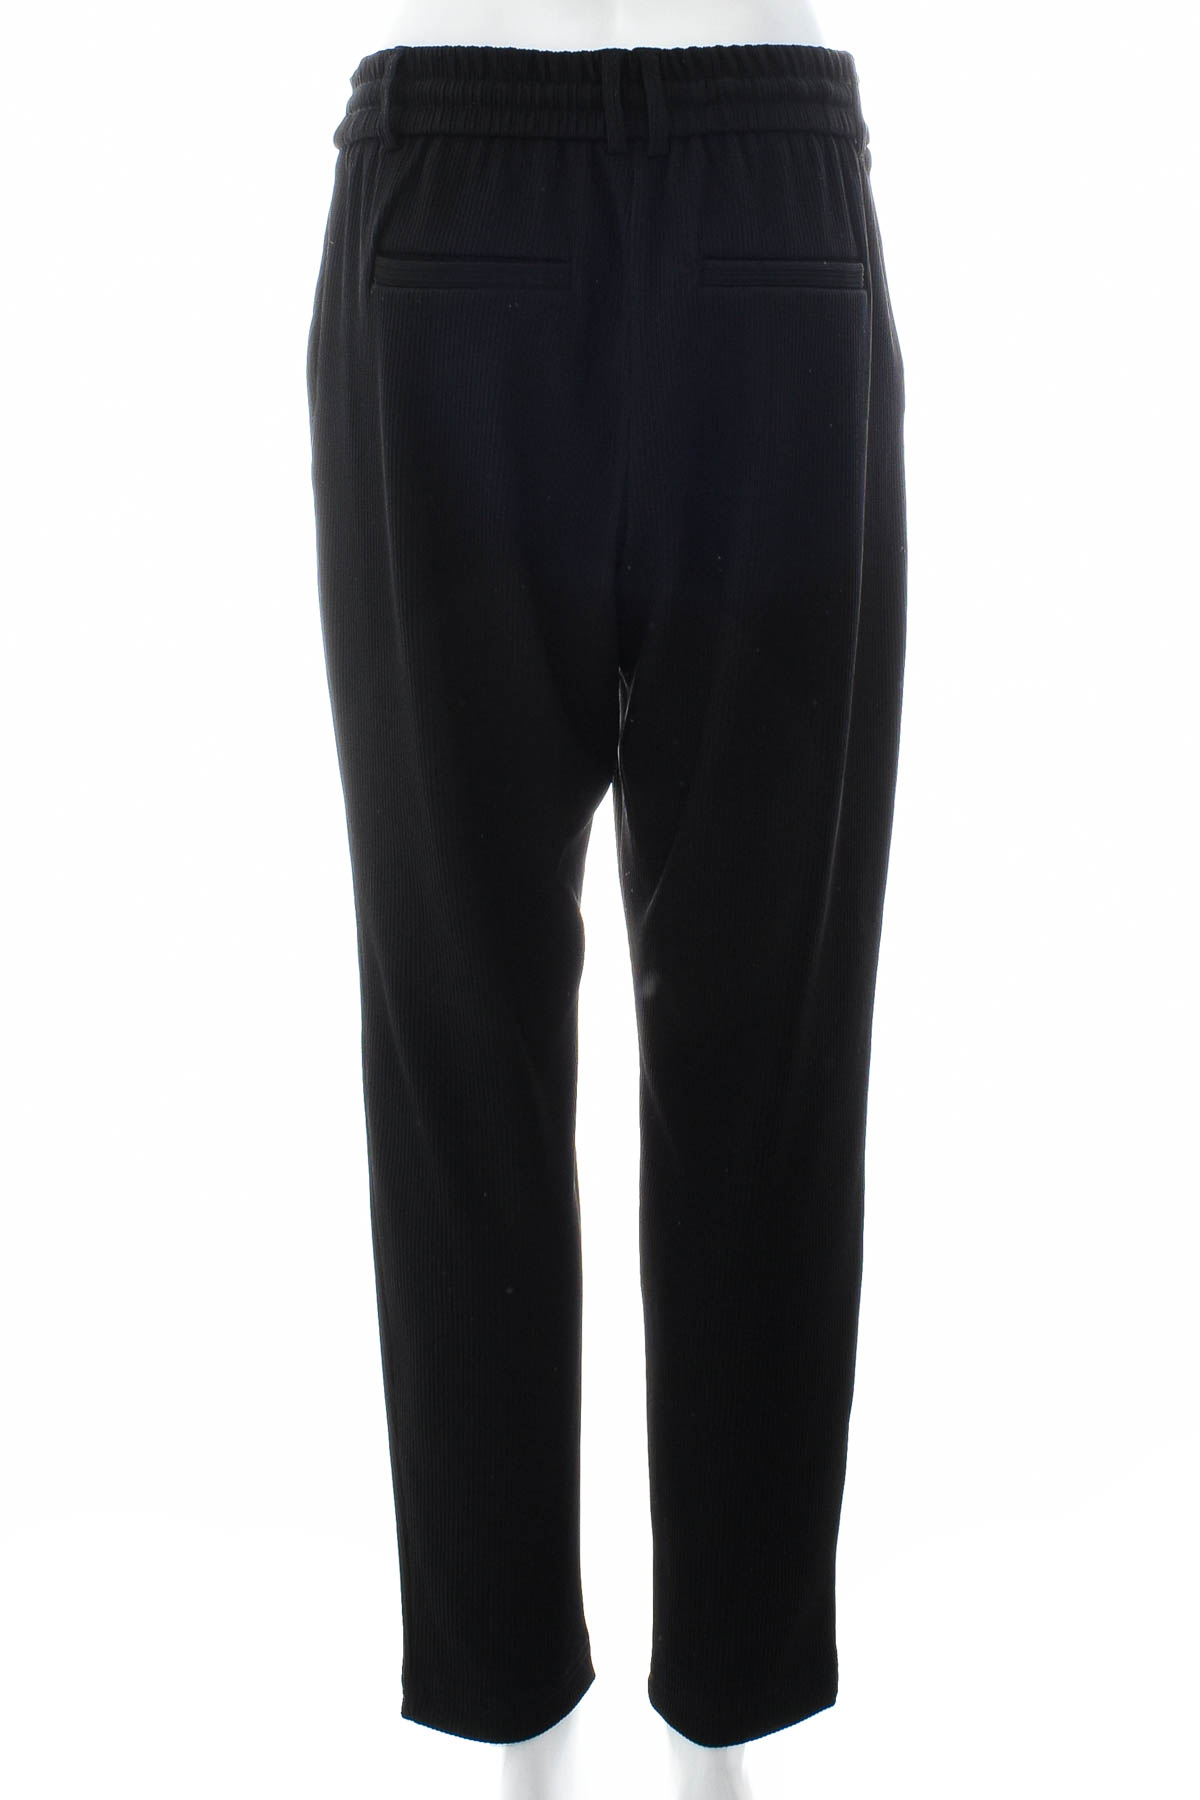 Women's trousers - ONLY - 1